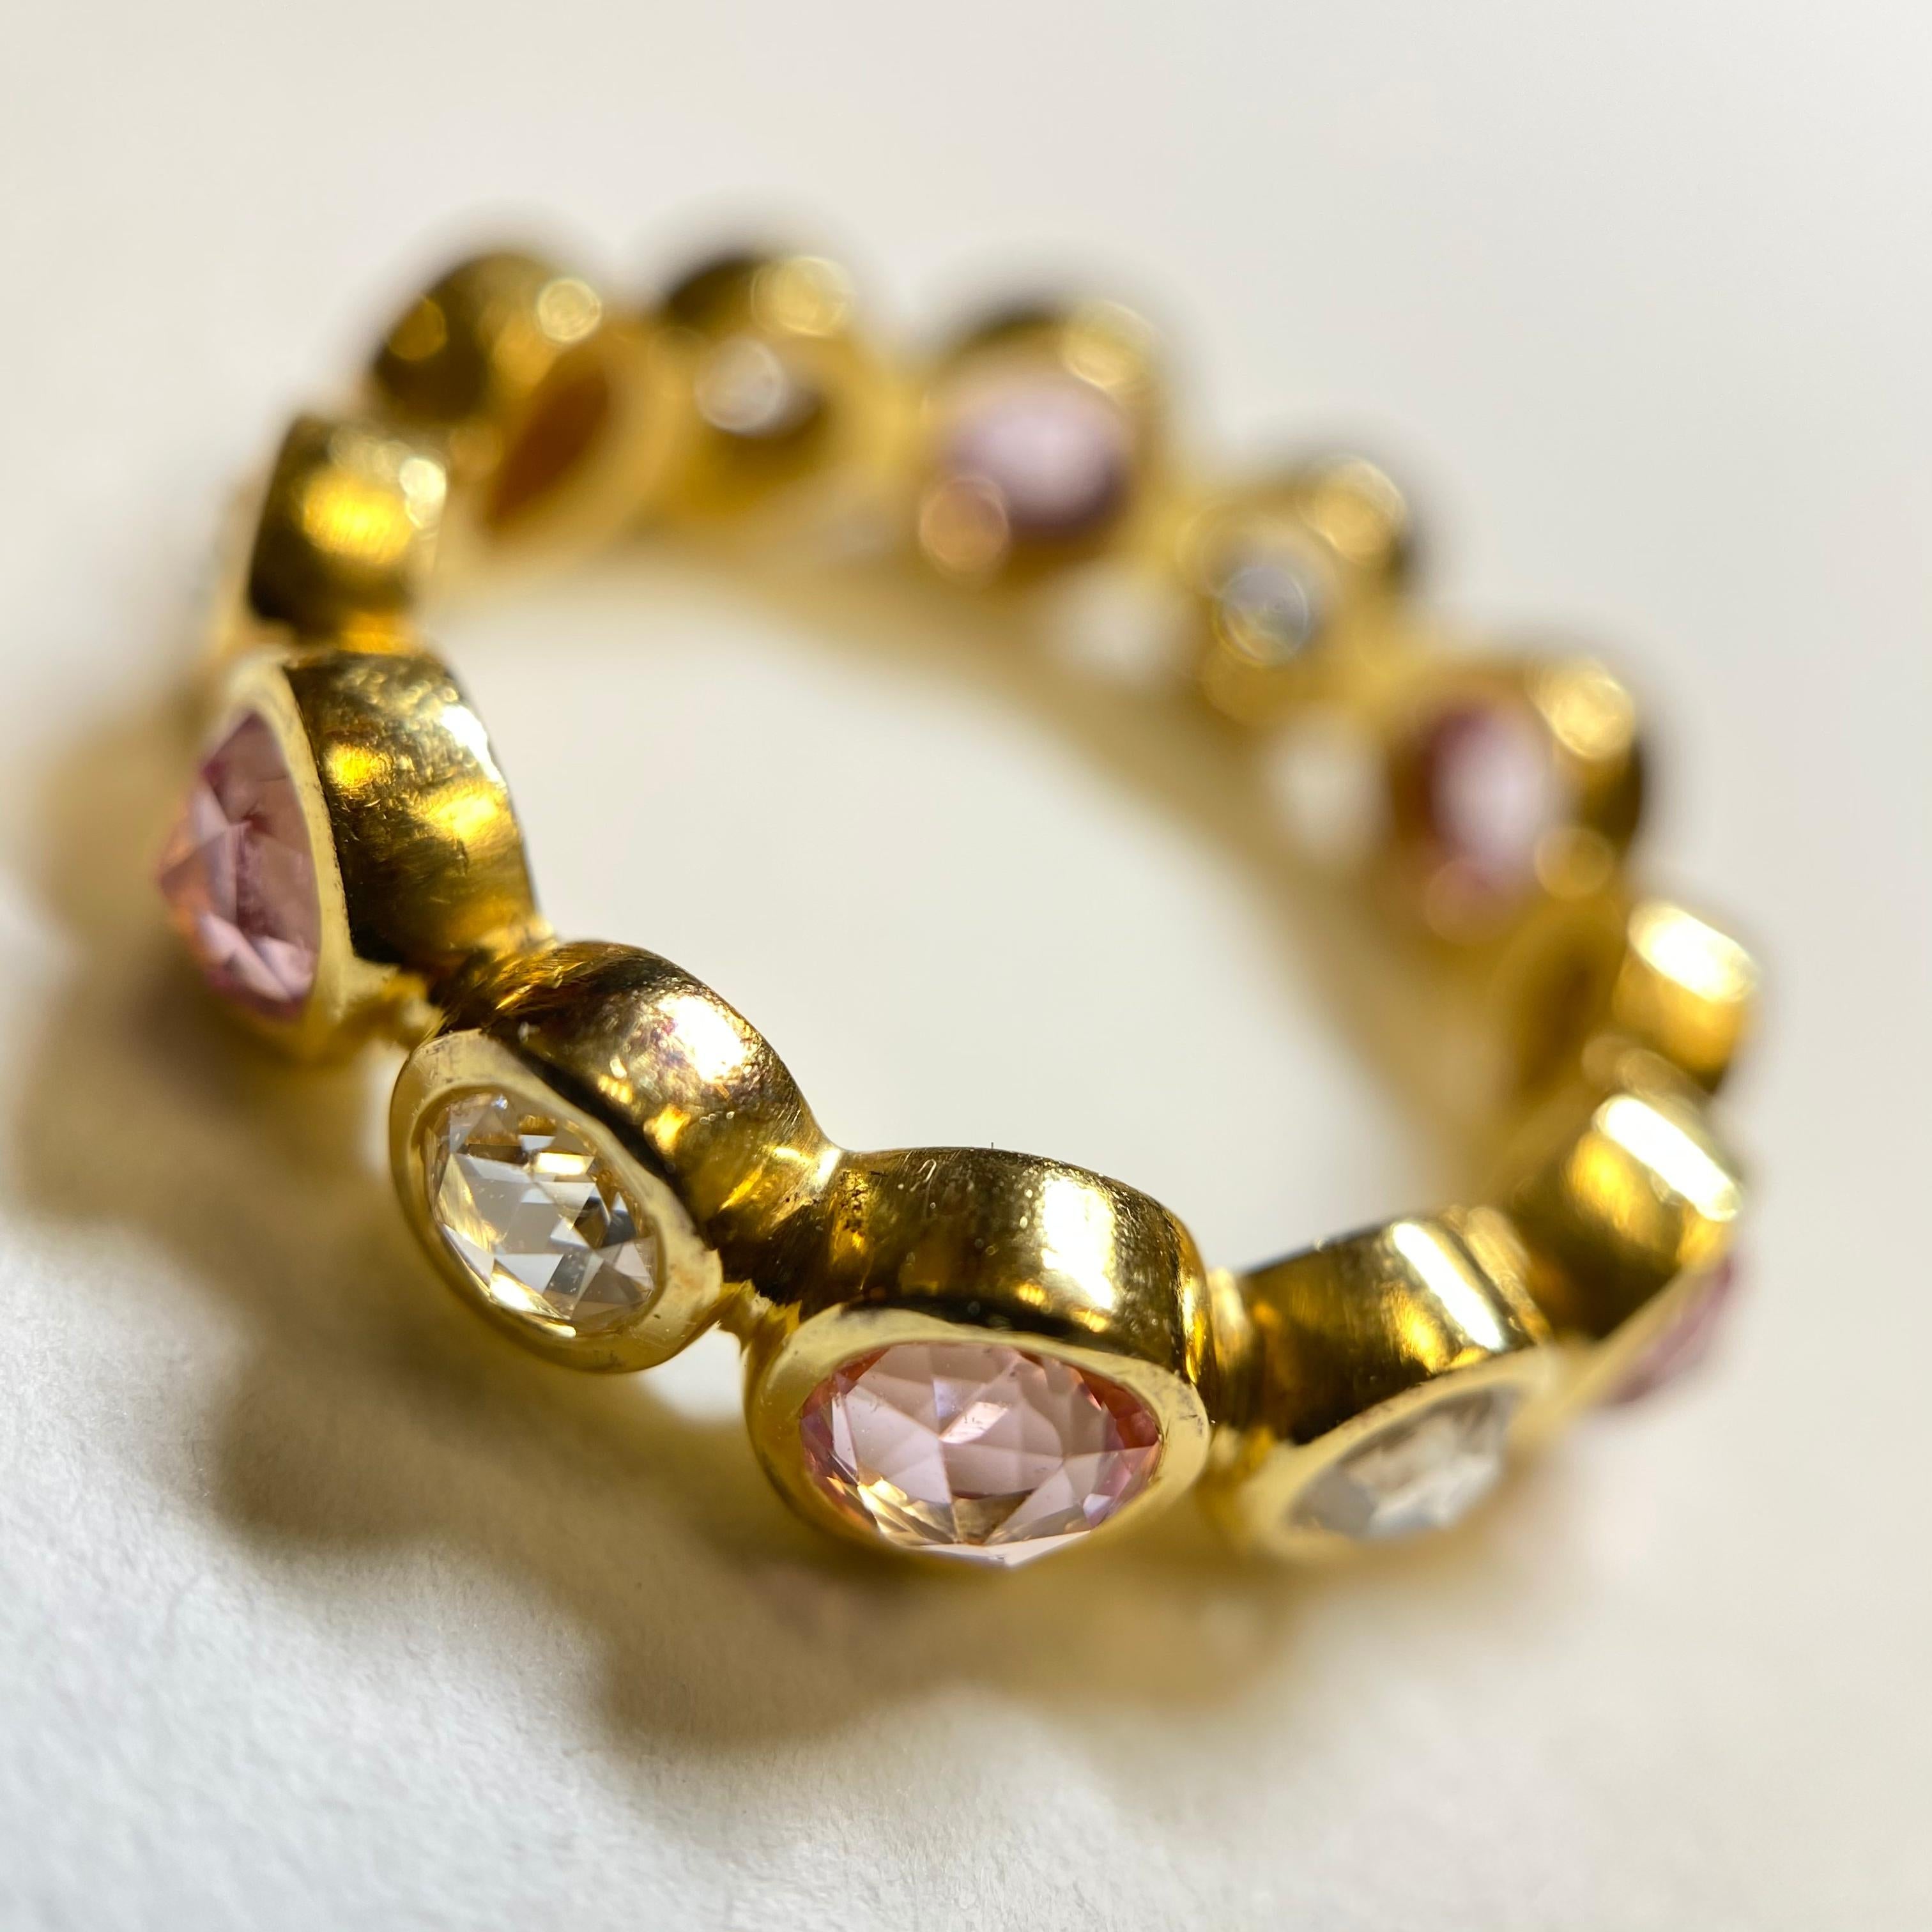 This sophisticated and feminine ring is set with alternating Rose Cut Diamonds and custom-cut Rose Cut Pink Sapphires. 
Rose Cut Diamonds were made popular in the Georgian Era (the 1700's), and have re-emerged as an ethereal, antique-inspired